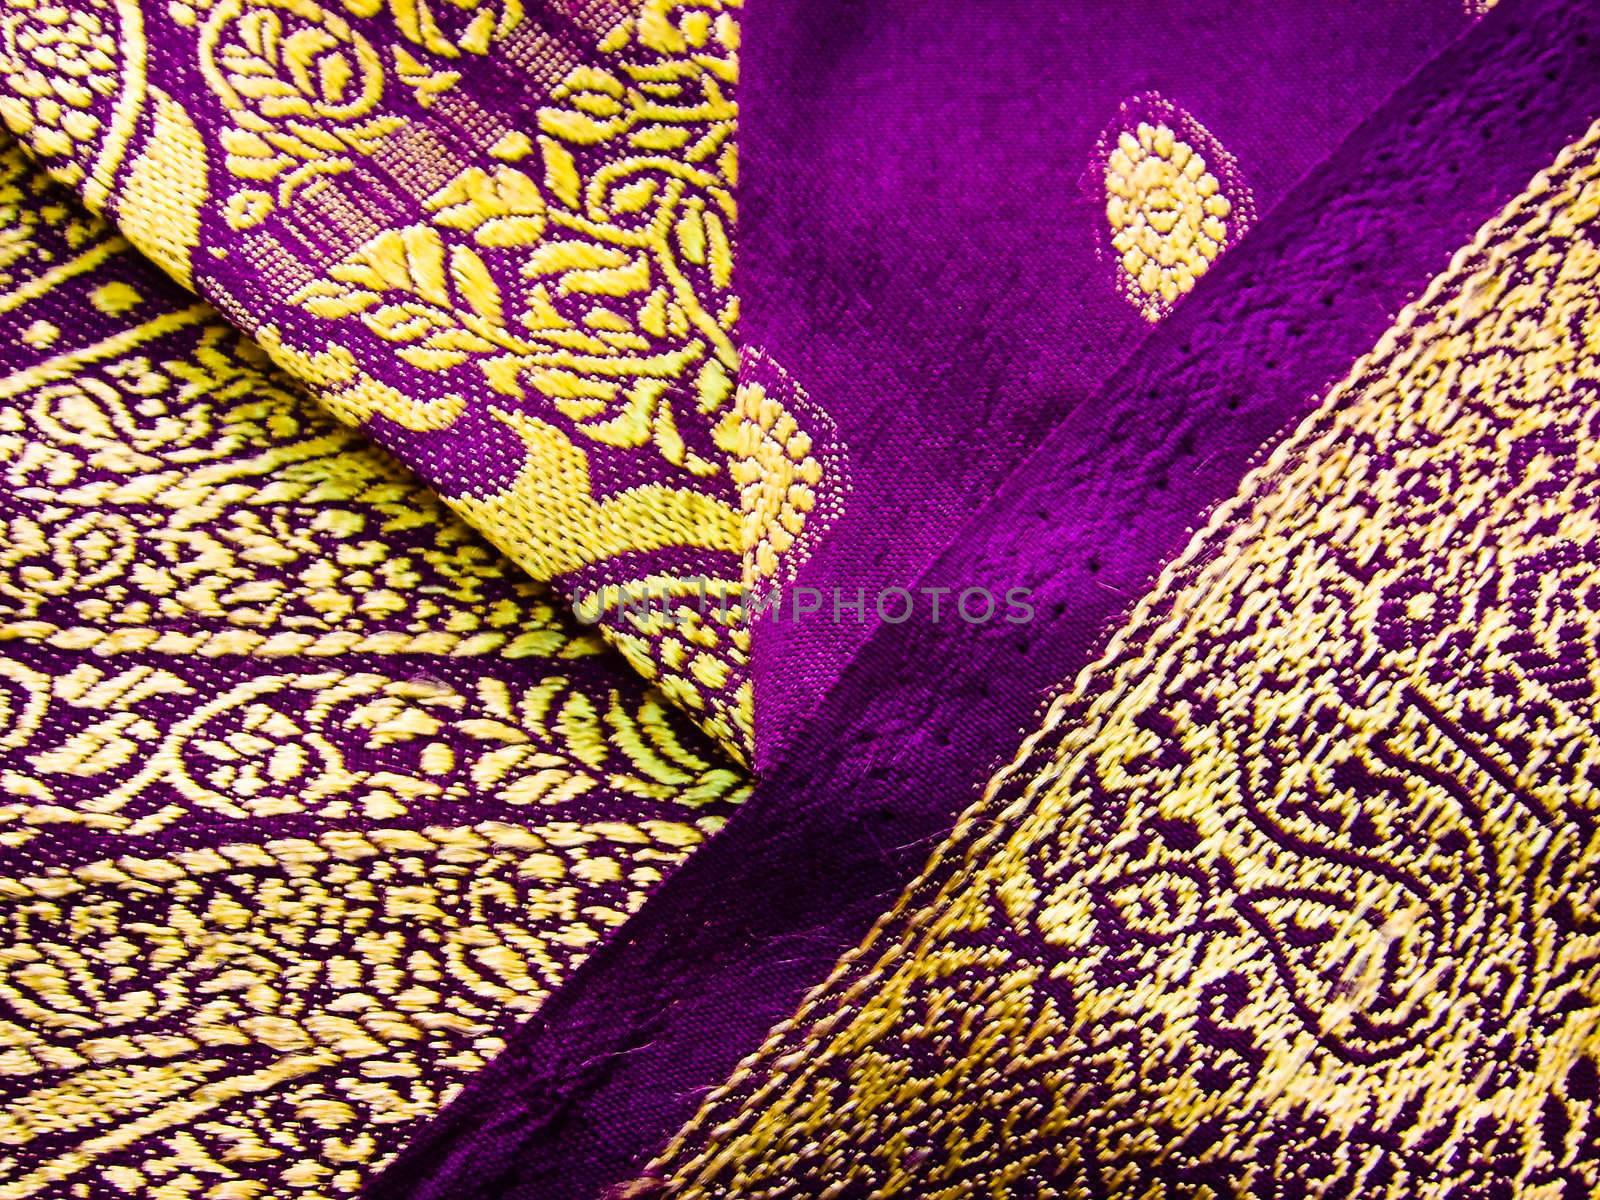 purple and yellow traditional indian outfit known as a saree/sari